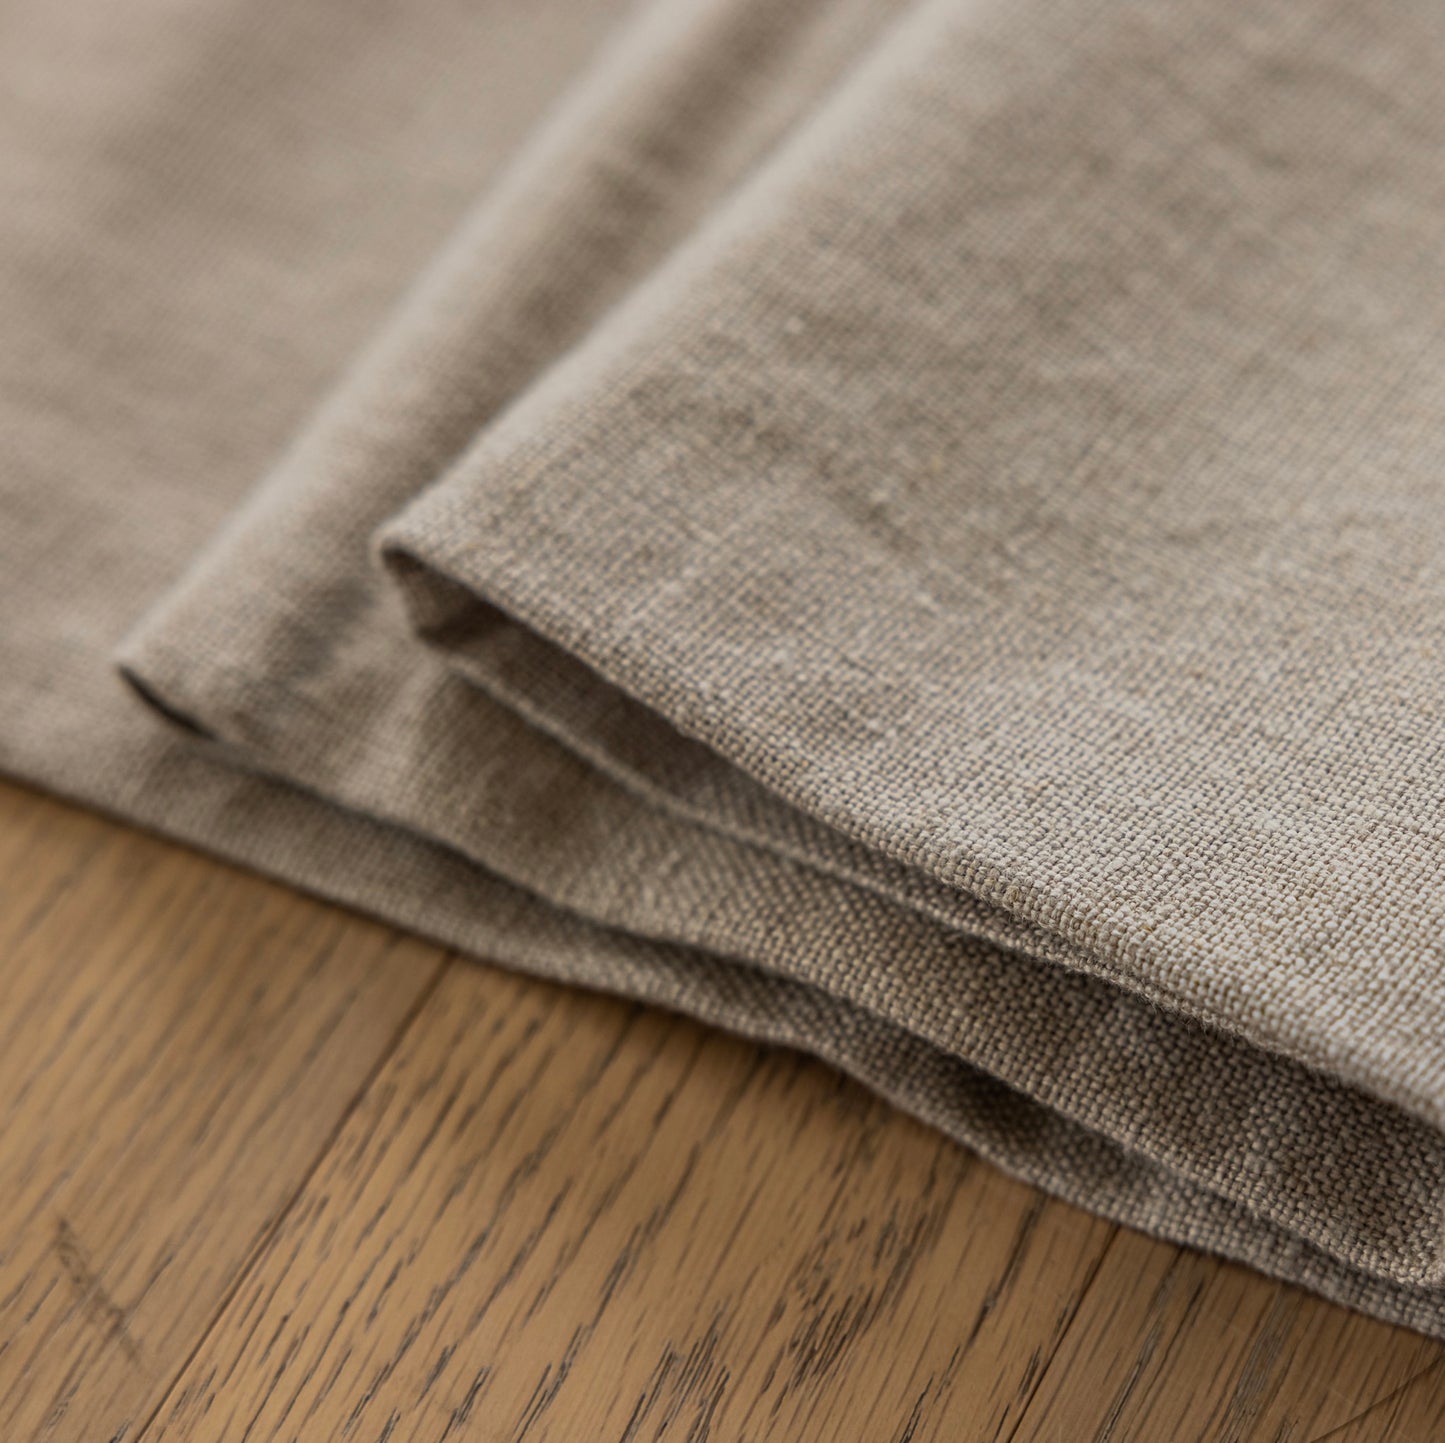 Thick Linen Roman Shades, Luxury Natural Fabric Pure Linen Blinds, Made to order